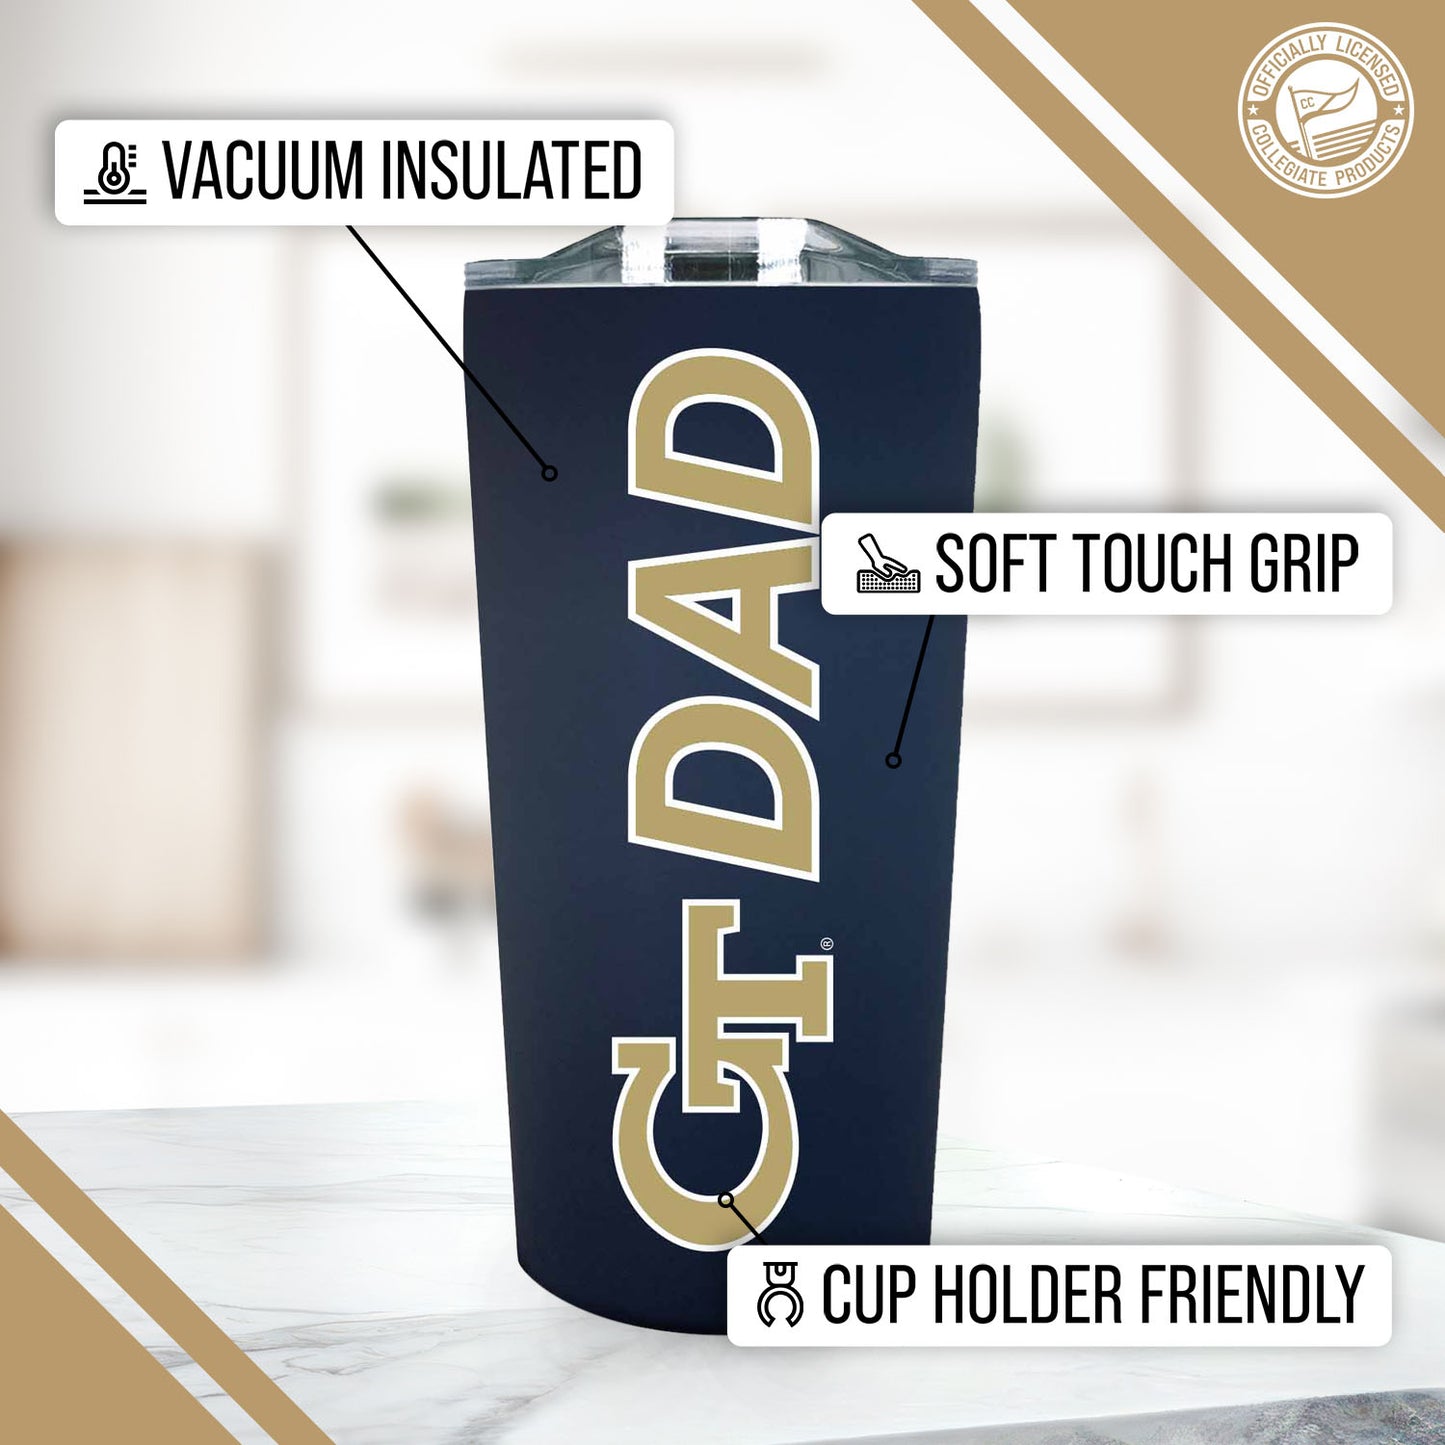 Georgia Tech Yellowjackets NCAA Stainless Steel Travel Tumbler for Dad - Navy